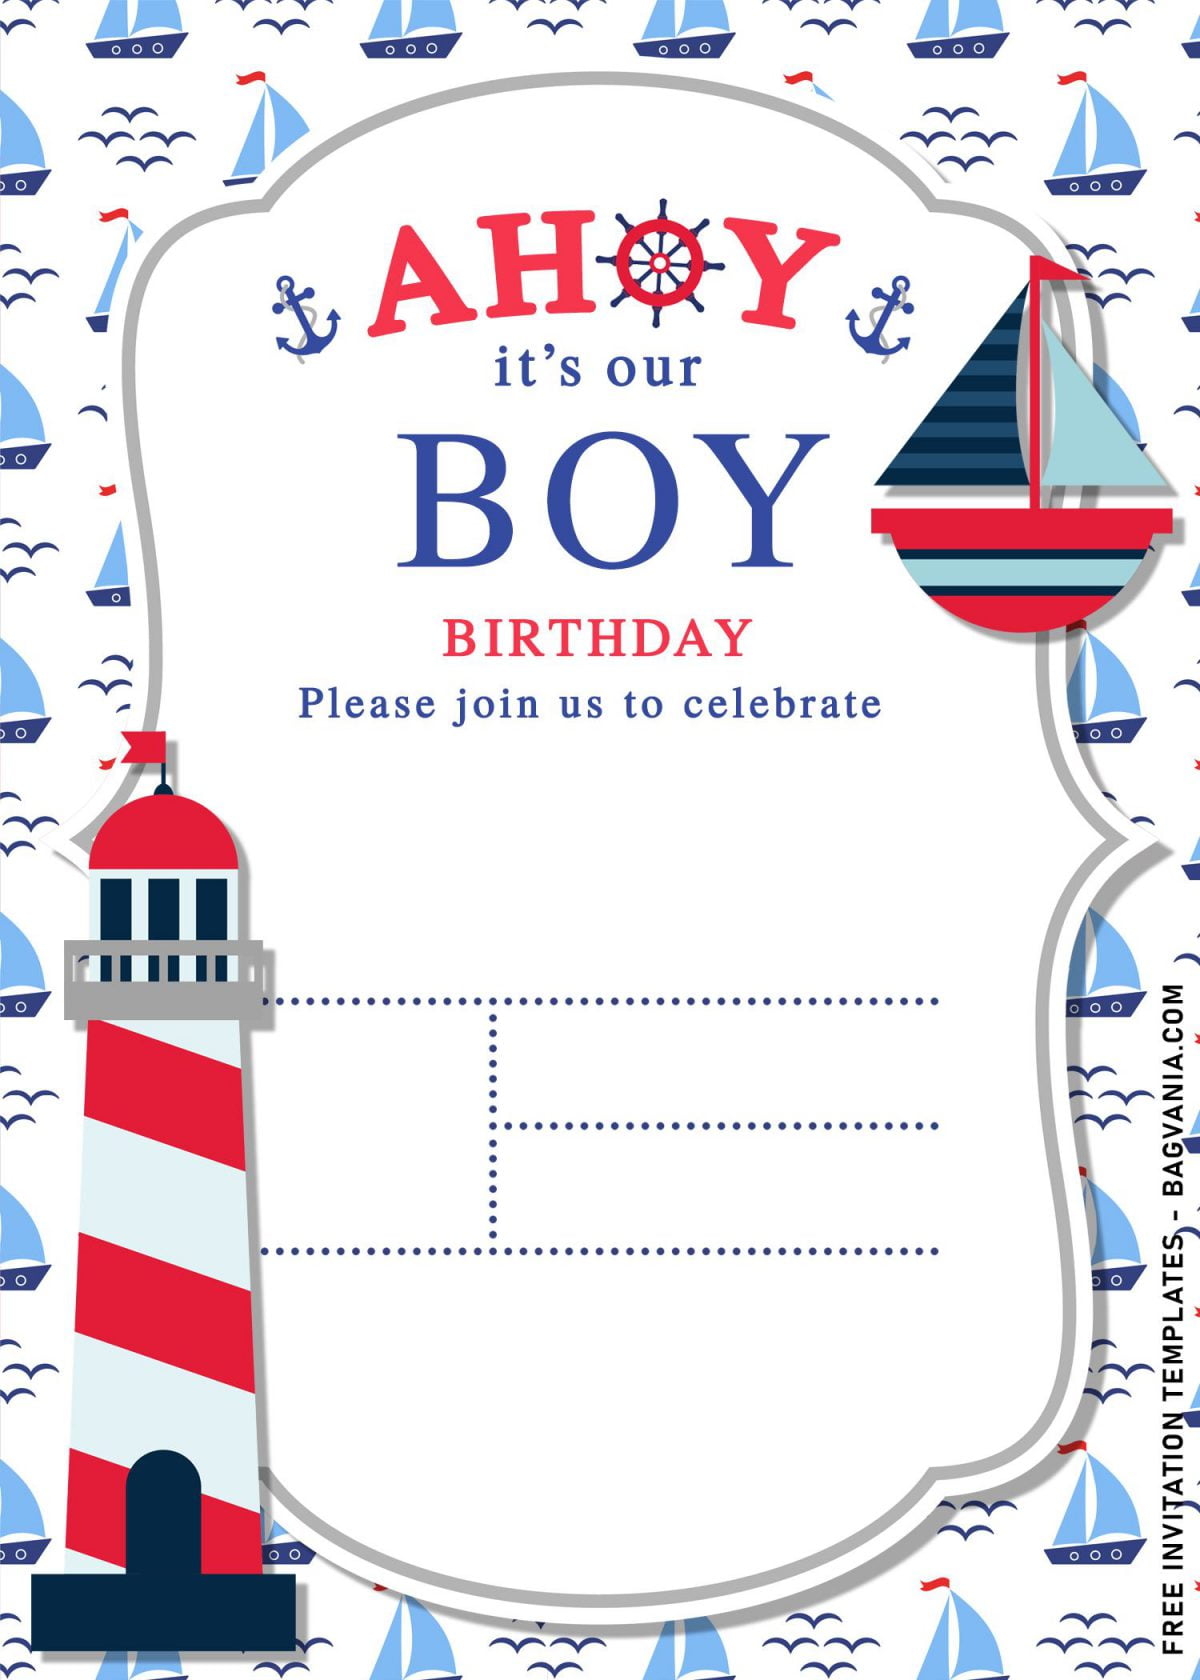 11+ Nautical Themed Birthday Invitation Templates For Your Kid’s Birthday Bash and has Sail boat